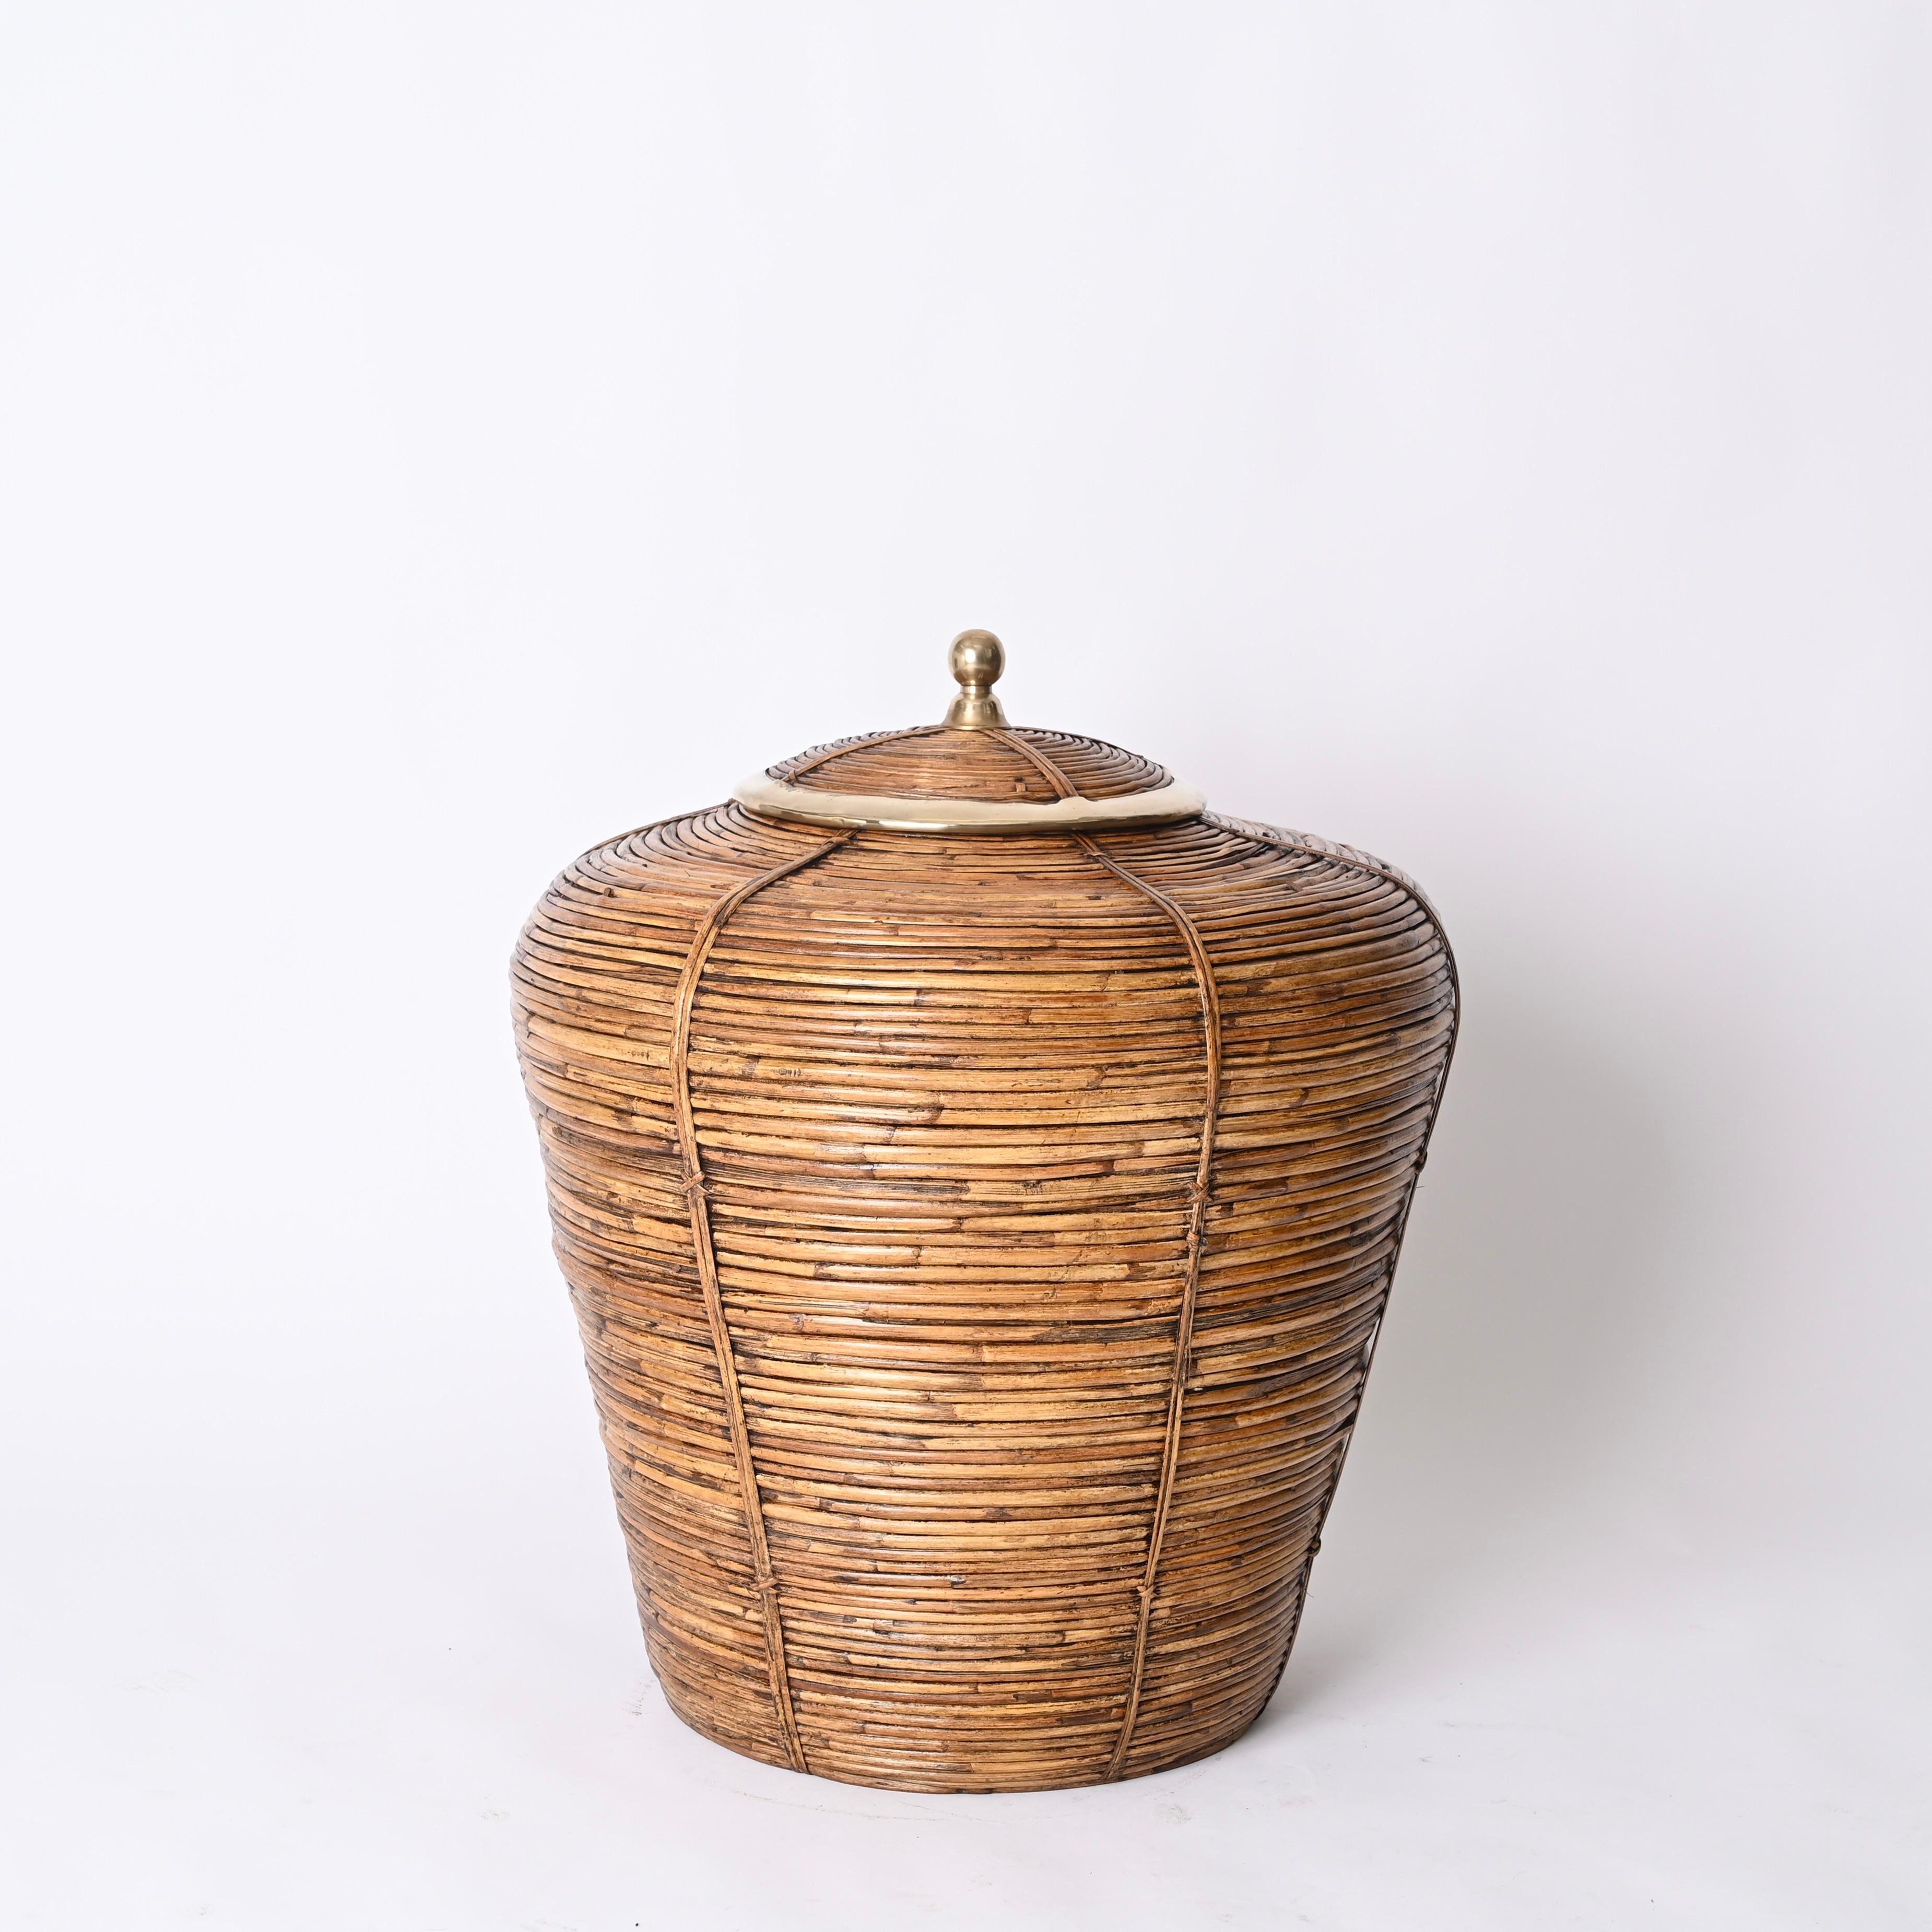 Fantastic French Riviera style decorative basket fully made in curved rattan, wicker and brass. This unique object was made in Italy during the 1970s in the style of Gabriella Crespi.  

This stunning large decorative basket is fully made in curved